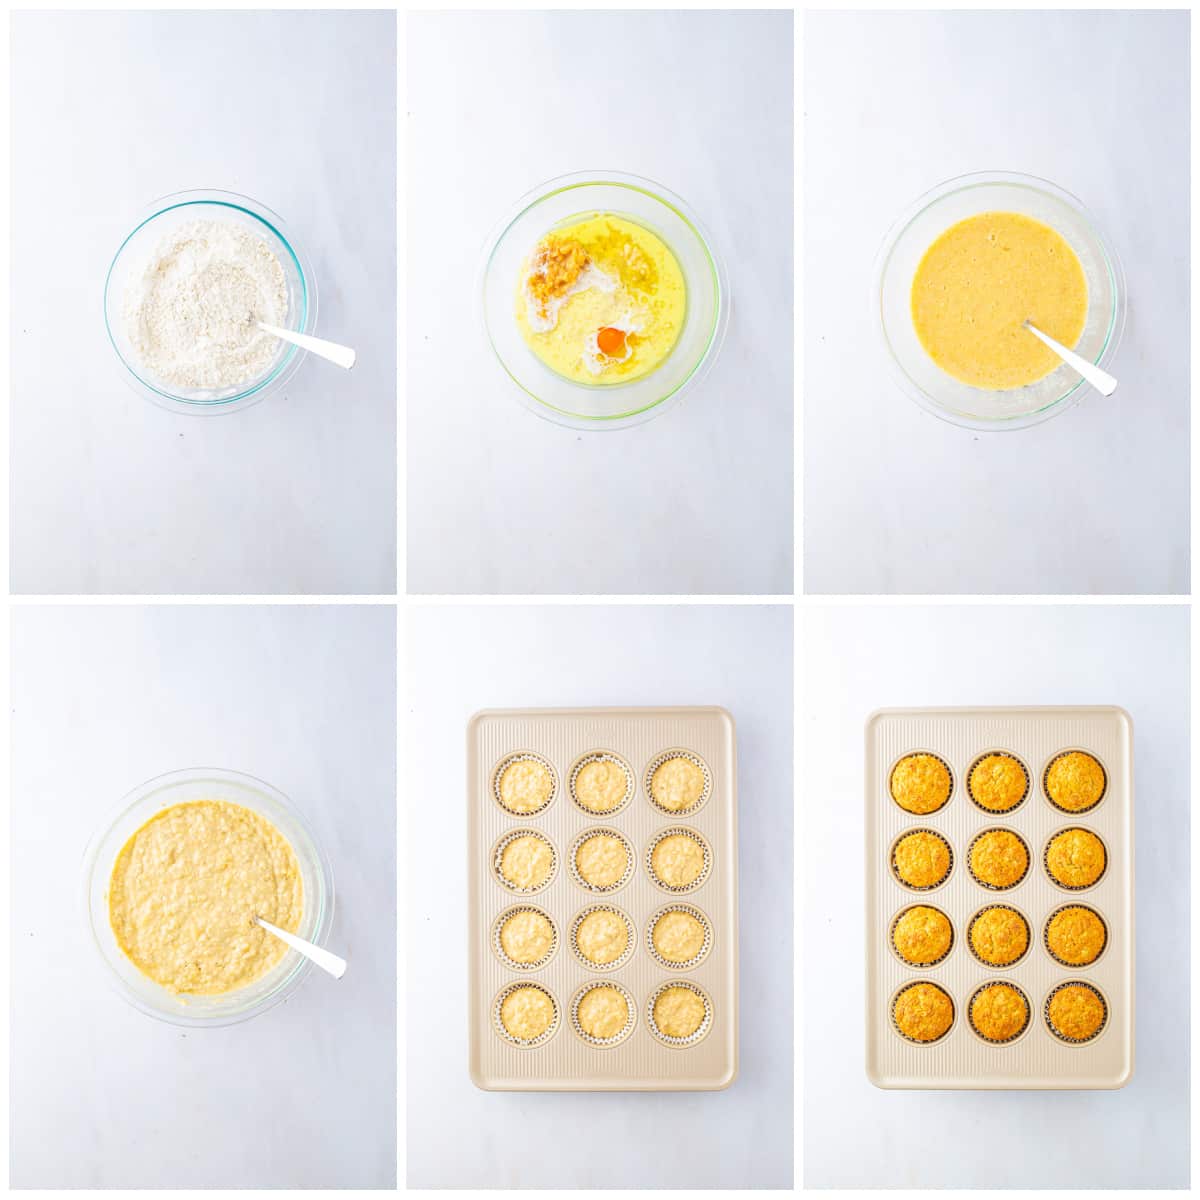 Step by step photos on how to make Apple Banana Oat Muffins.